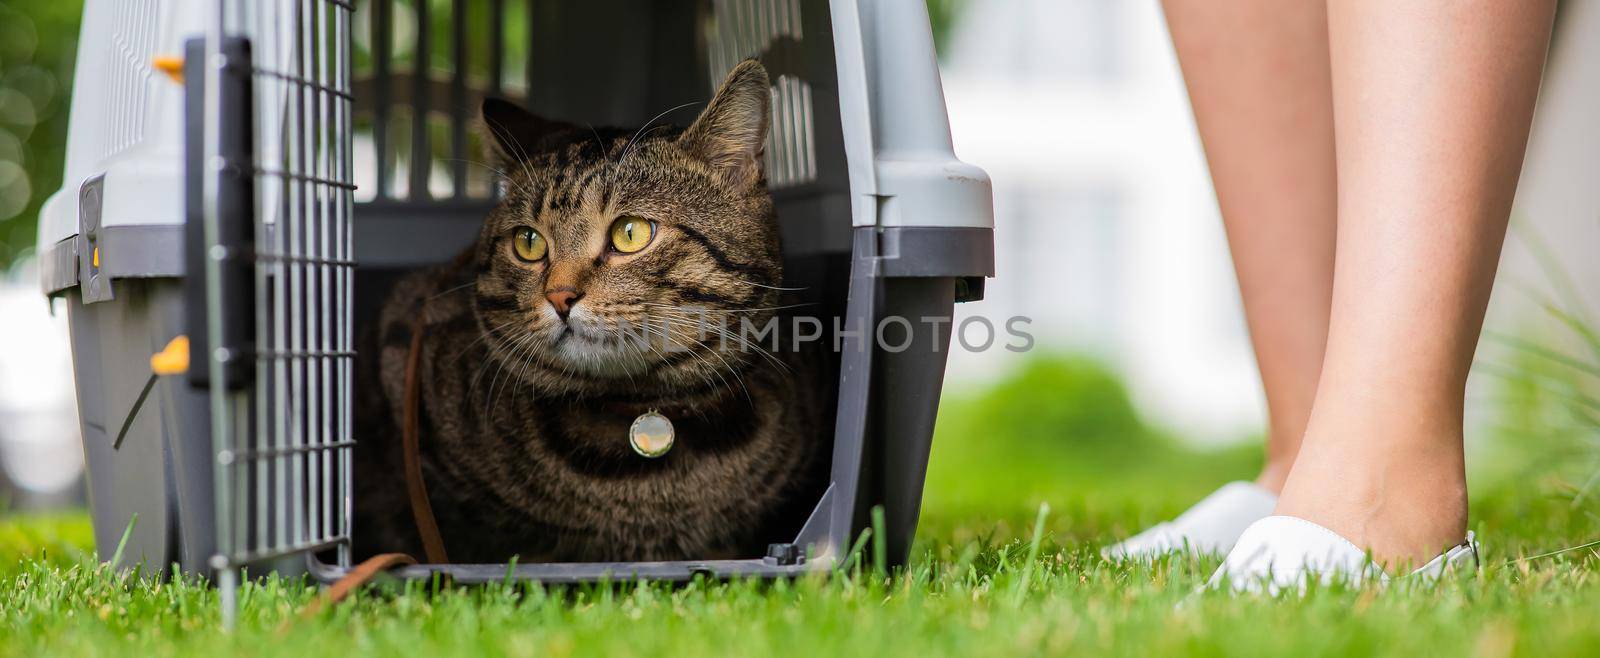 A gray striped cat lies in a carrier on the green grass in the open air next to the feet of the owner. by mrwed54